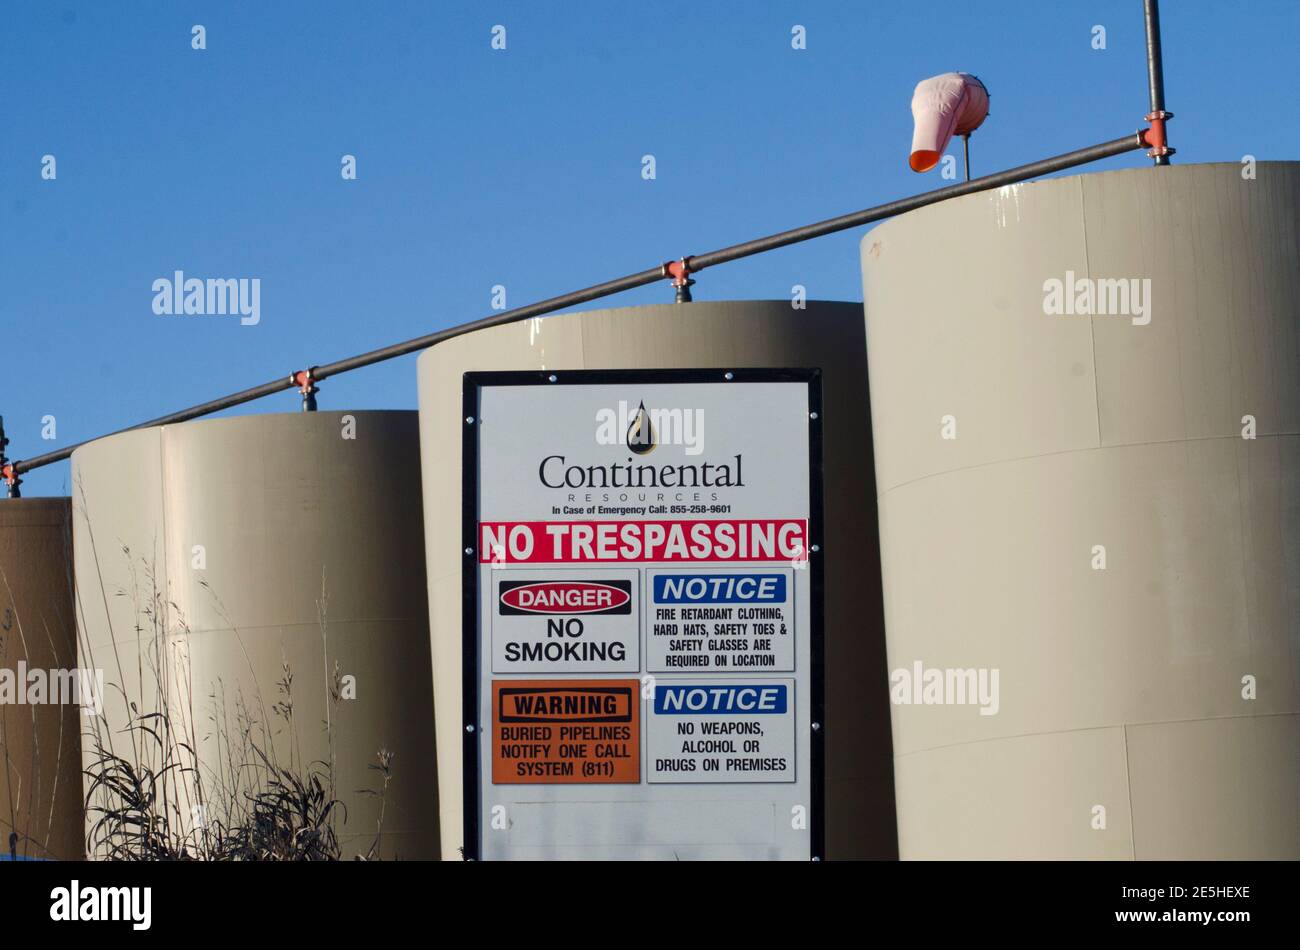 Storage tanks stand on a Continental Resources oil production site near Williston, North Dakota January 23, 2015.  REUTERS/Andrew Cullen   (UNITED STATES - Tags: BUSINESS ENERGY COMMODITIES) Stock Photo